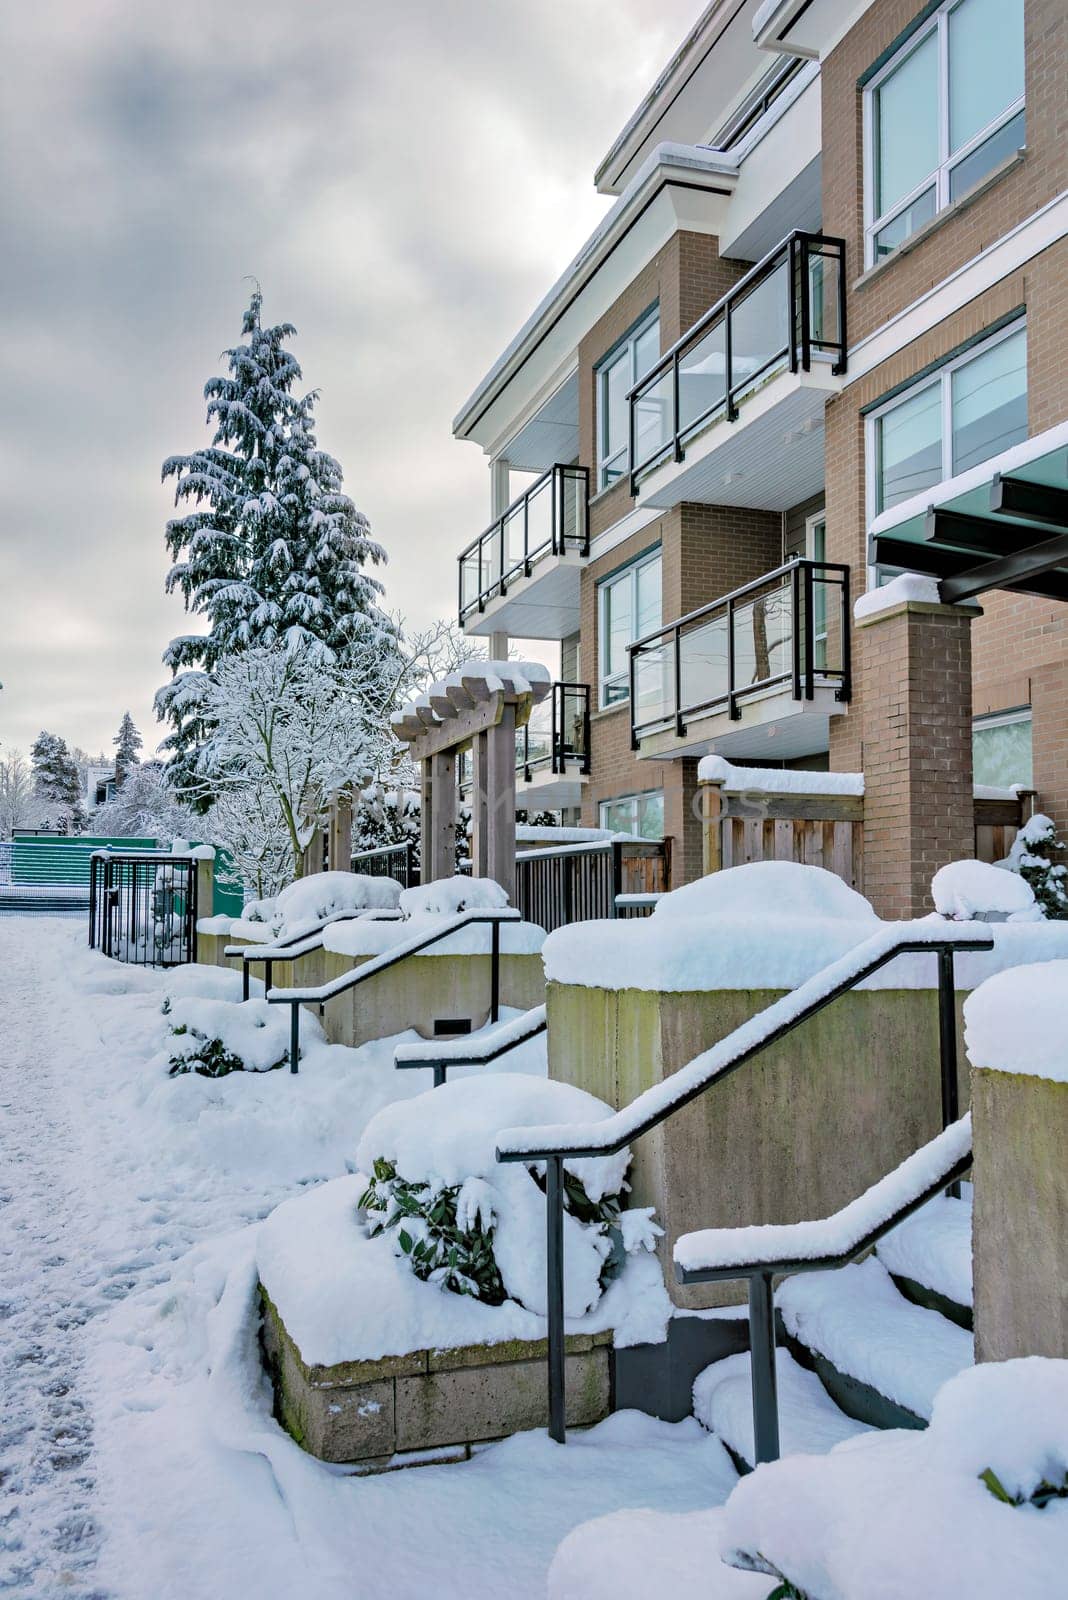 Low-rise residential building in snow on winter season in Vancouver, Canada.